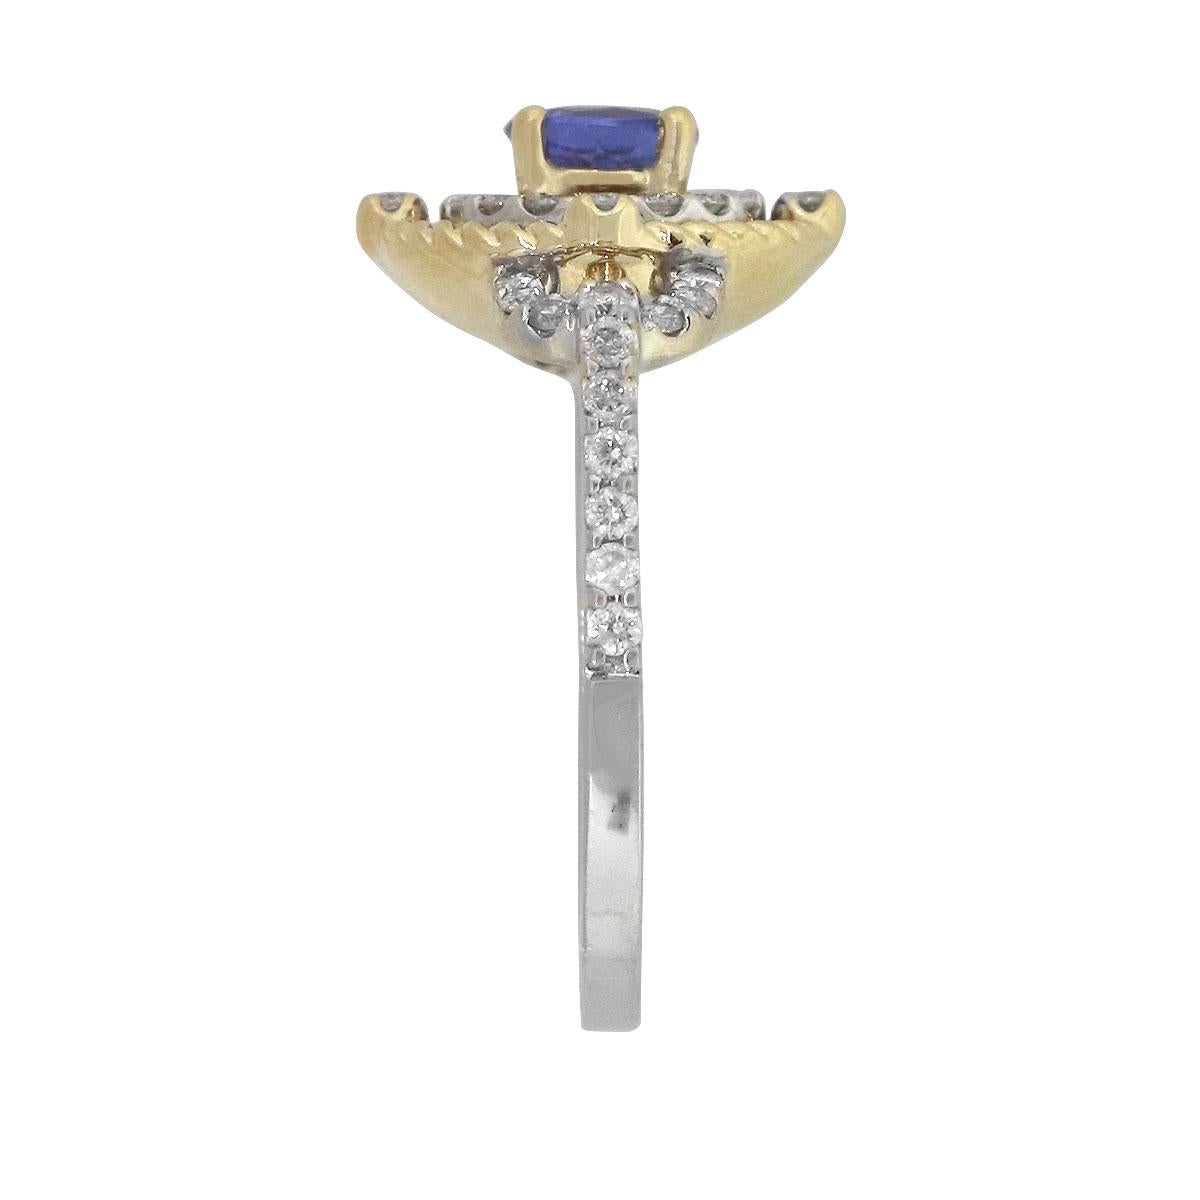 Material: 14k yellow and white gold
Center Gemstone Details: Approx. 0.50ct round cut tanzanite stone.
Adjacent Diamond Details: Approx. 0.69ctw of round cut diamonds. Diamonds are G/H in color and VS in clarity
Ring Measurements: 0.80″ x 0.53″ x